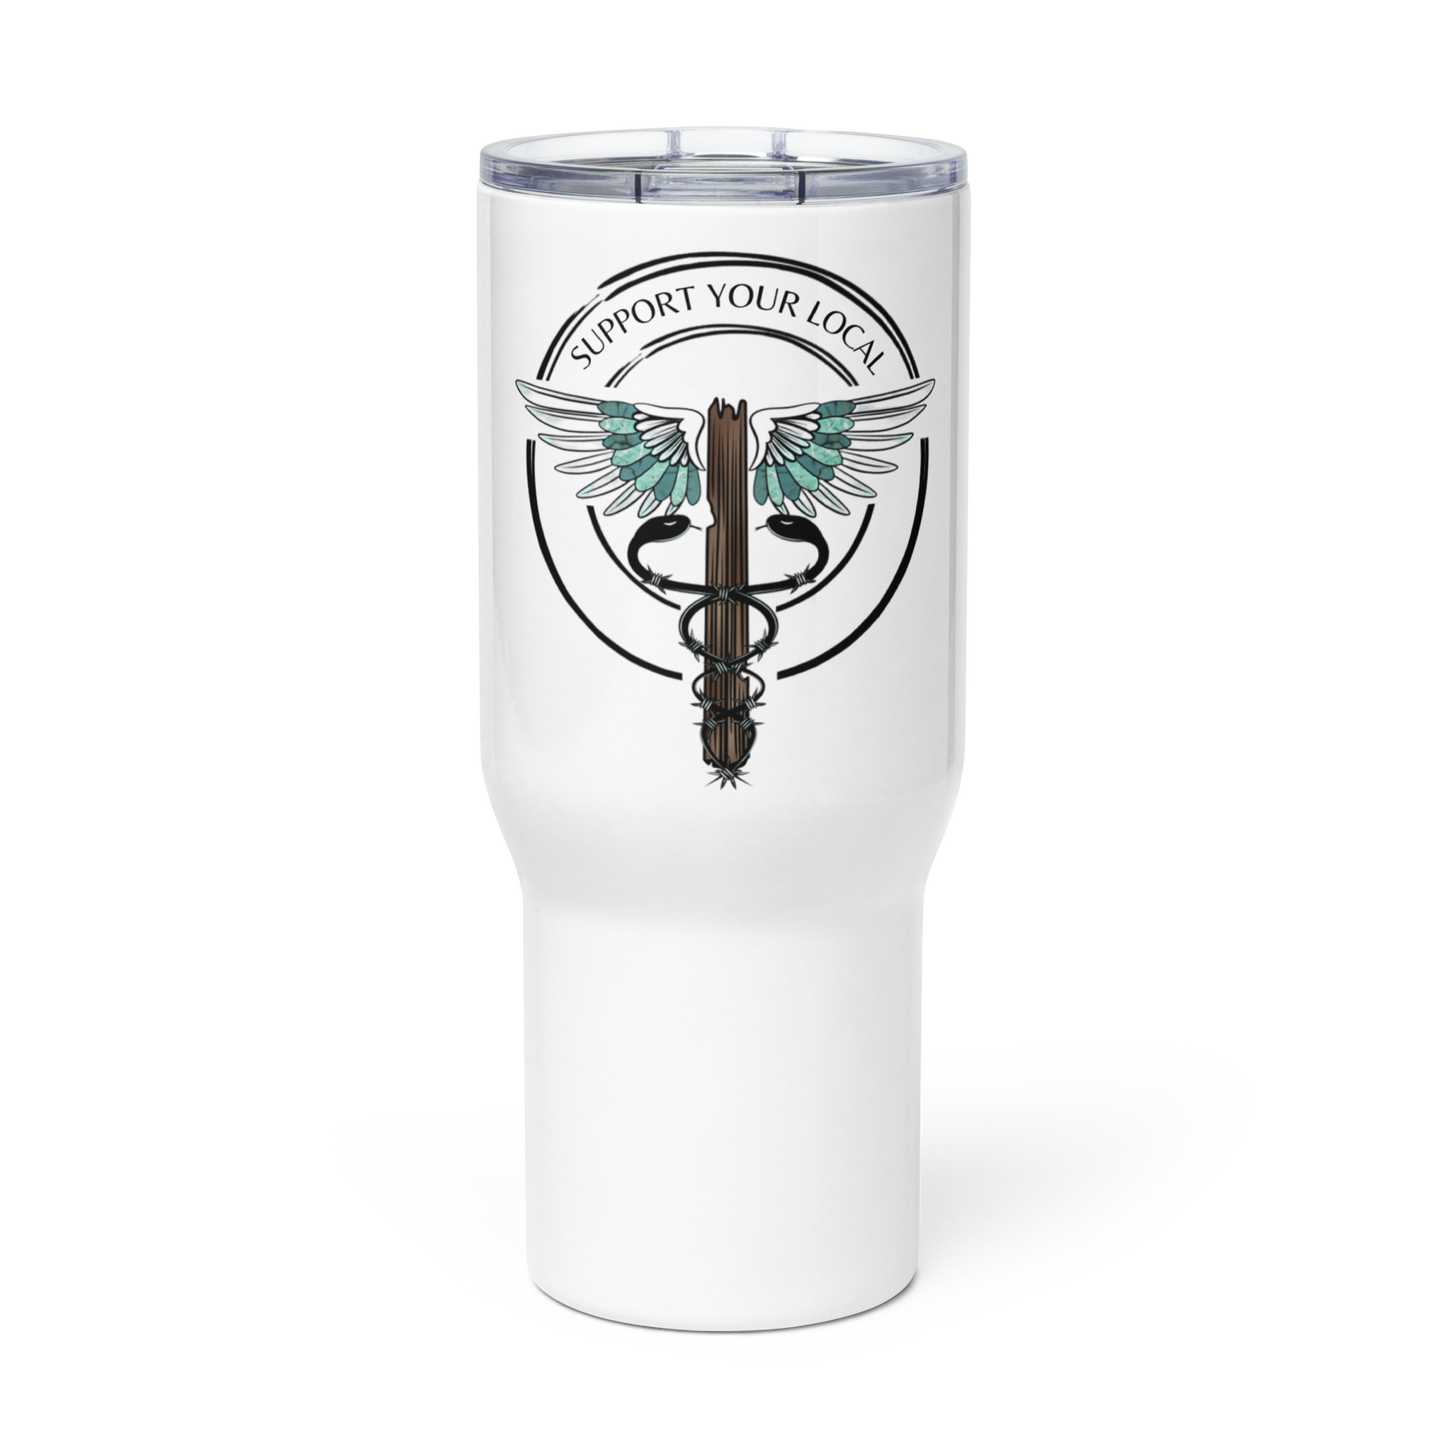 Support Your Local- Travel Tumbler